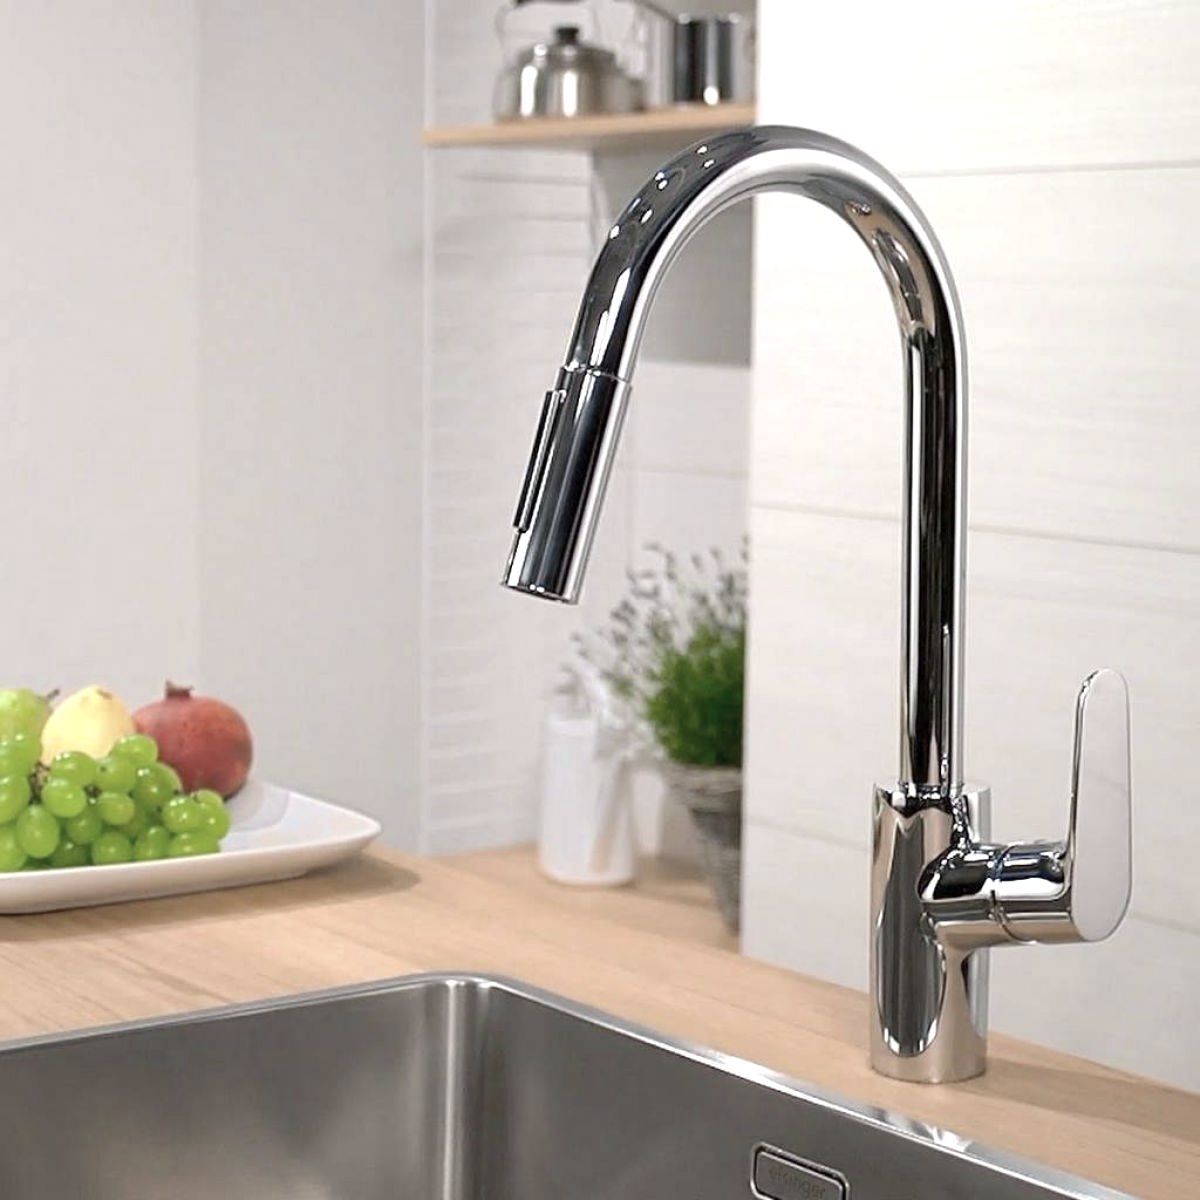 Hansgrohe Focus 240 Kitchen Mixer Tap With Pull-Out Spray